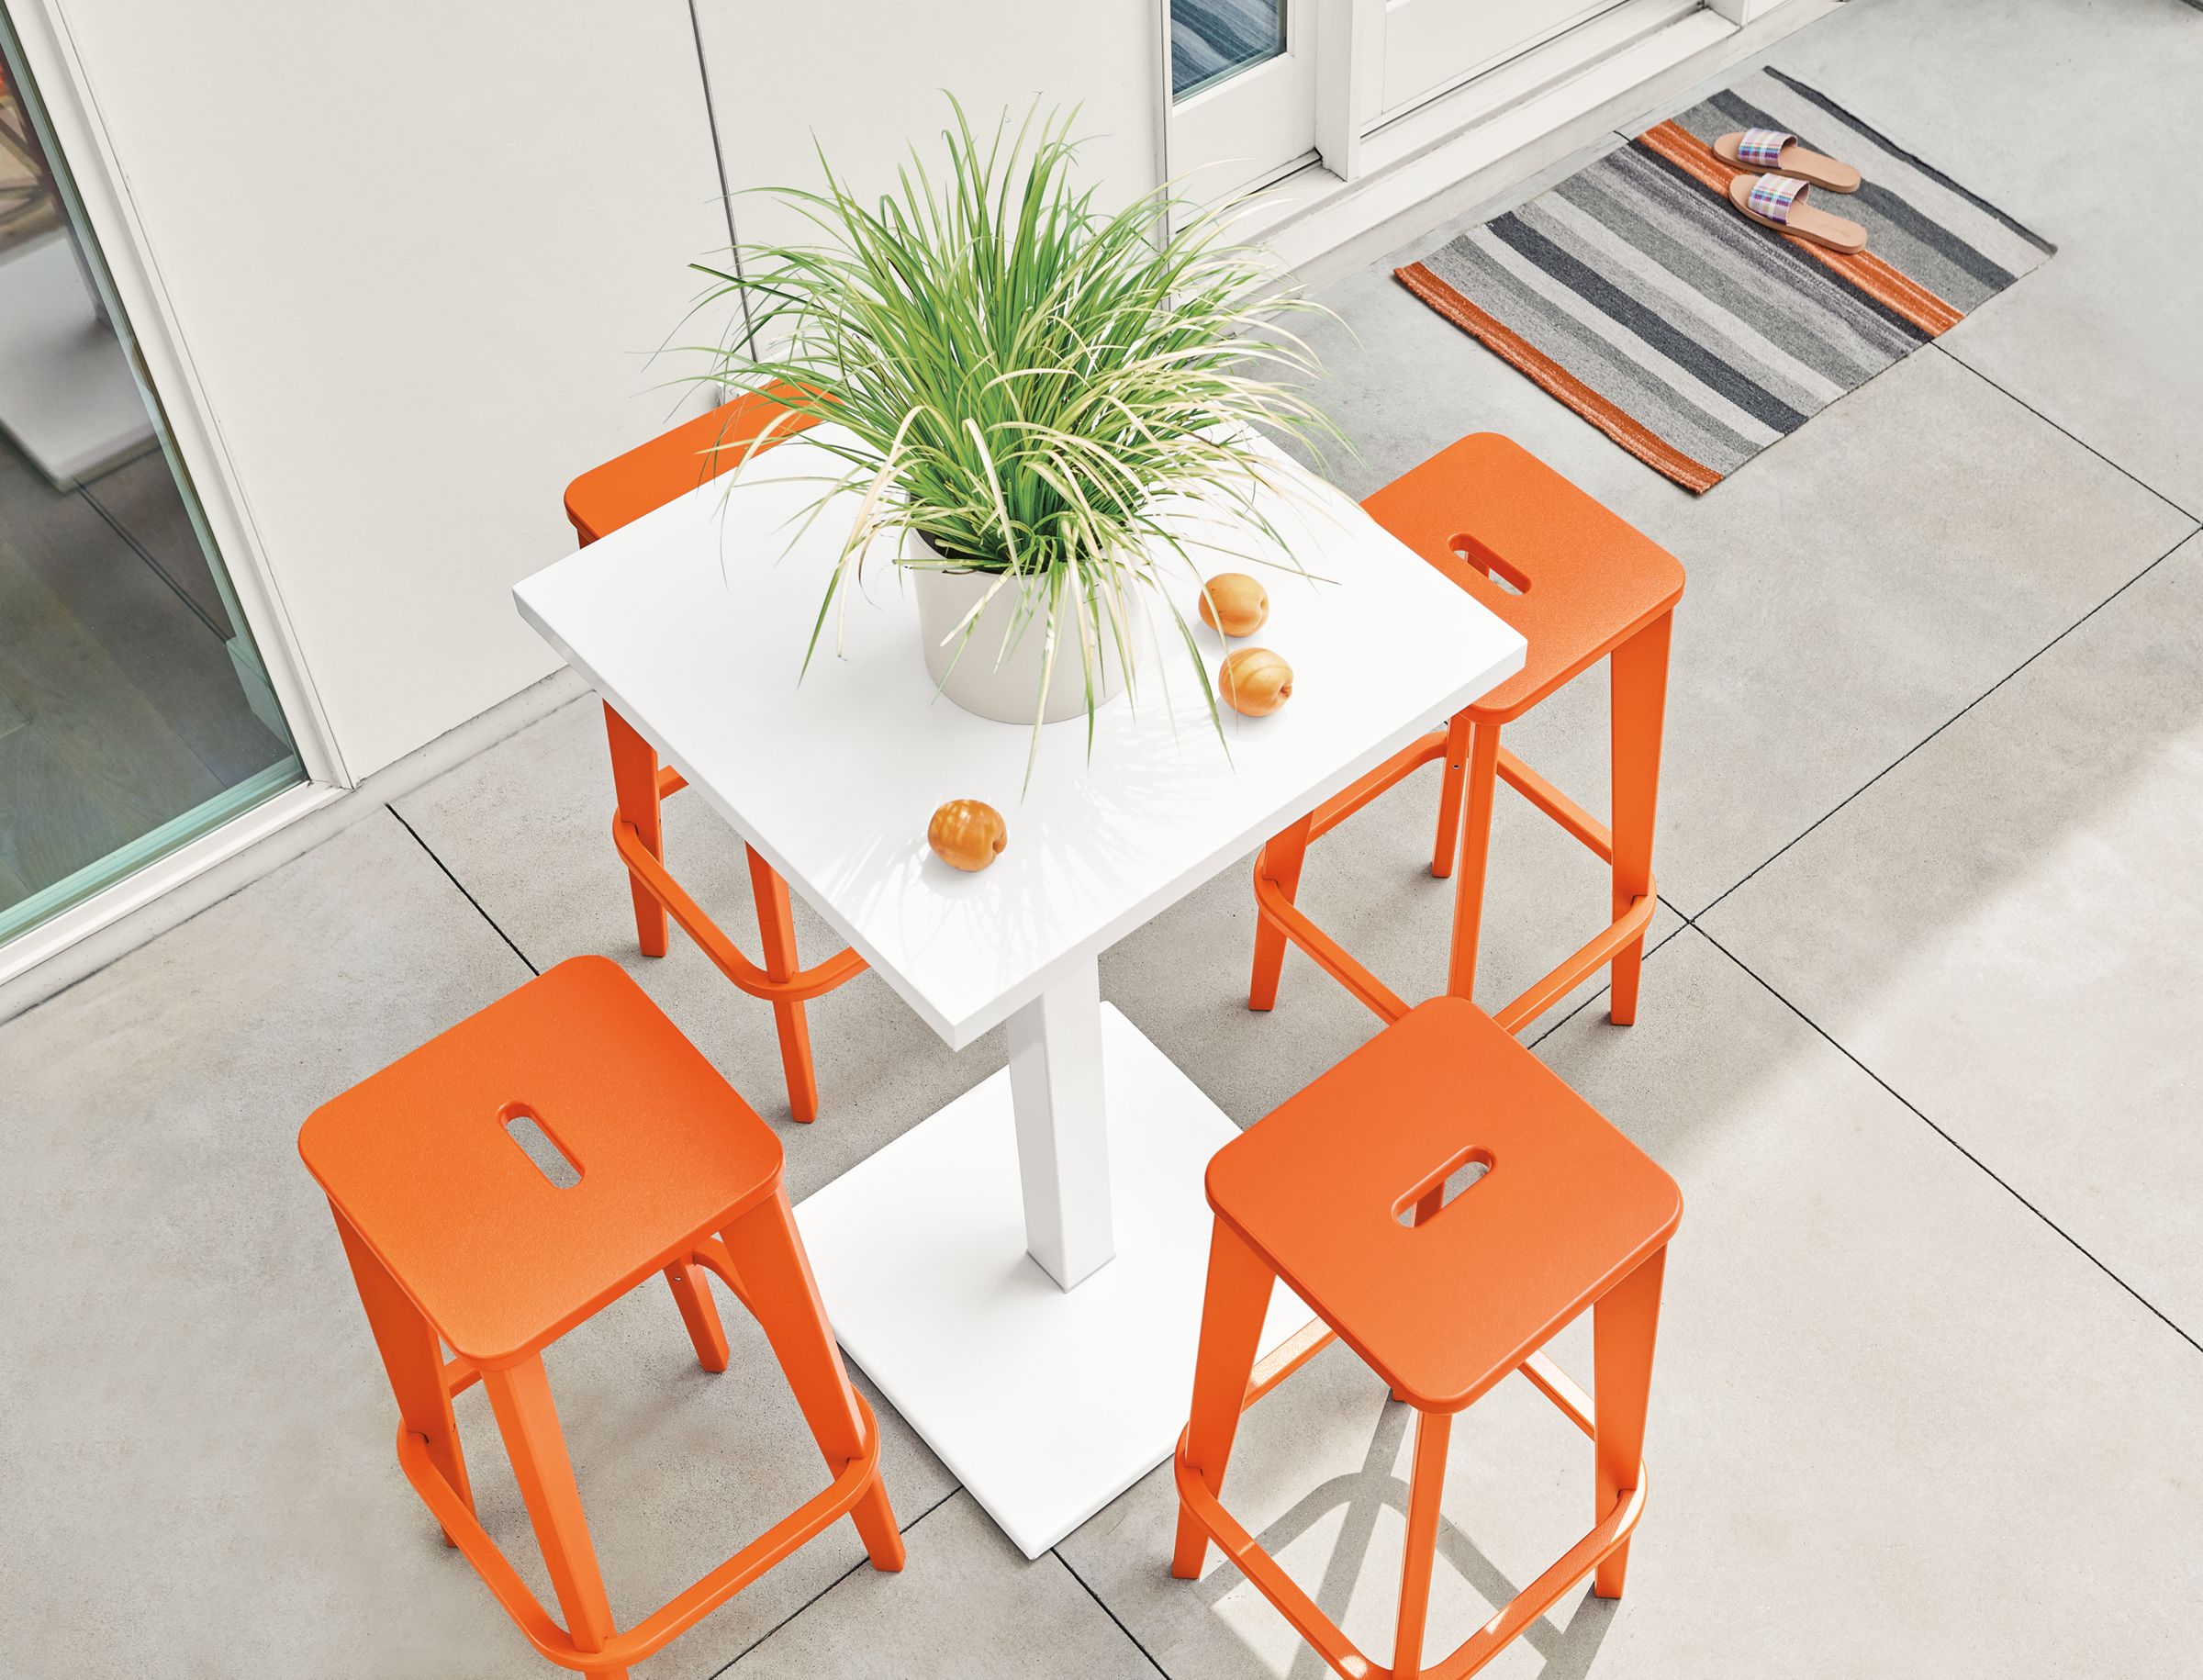 Detail of four Brook bar stools in orange on patio.